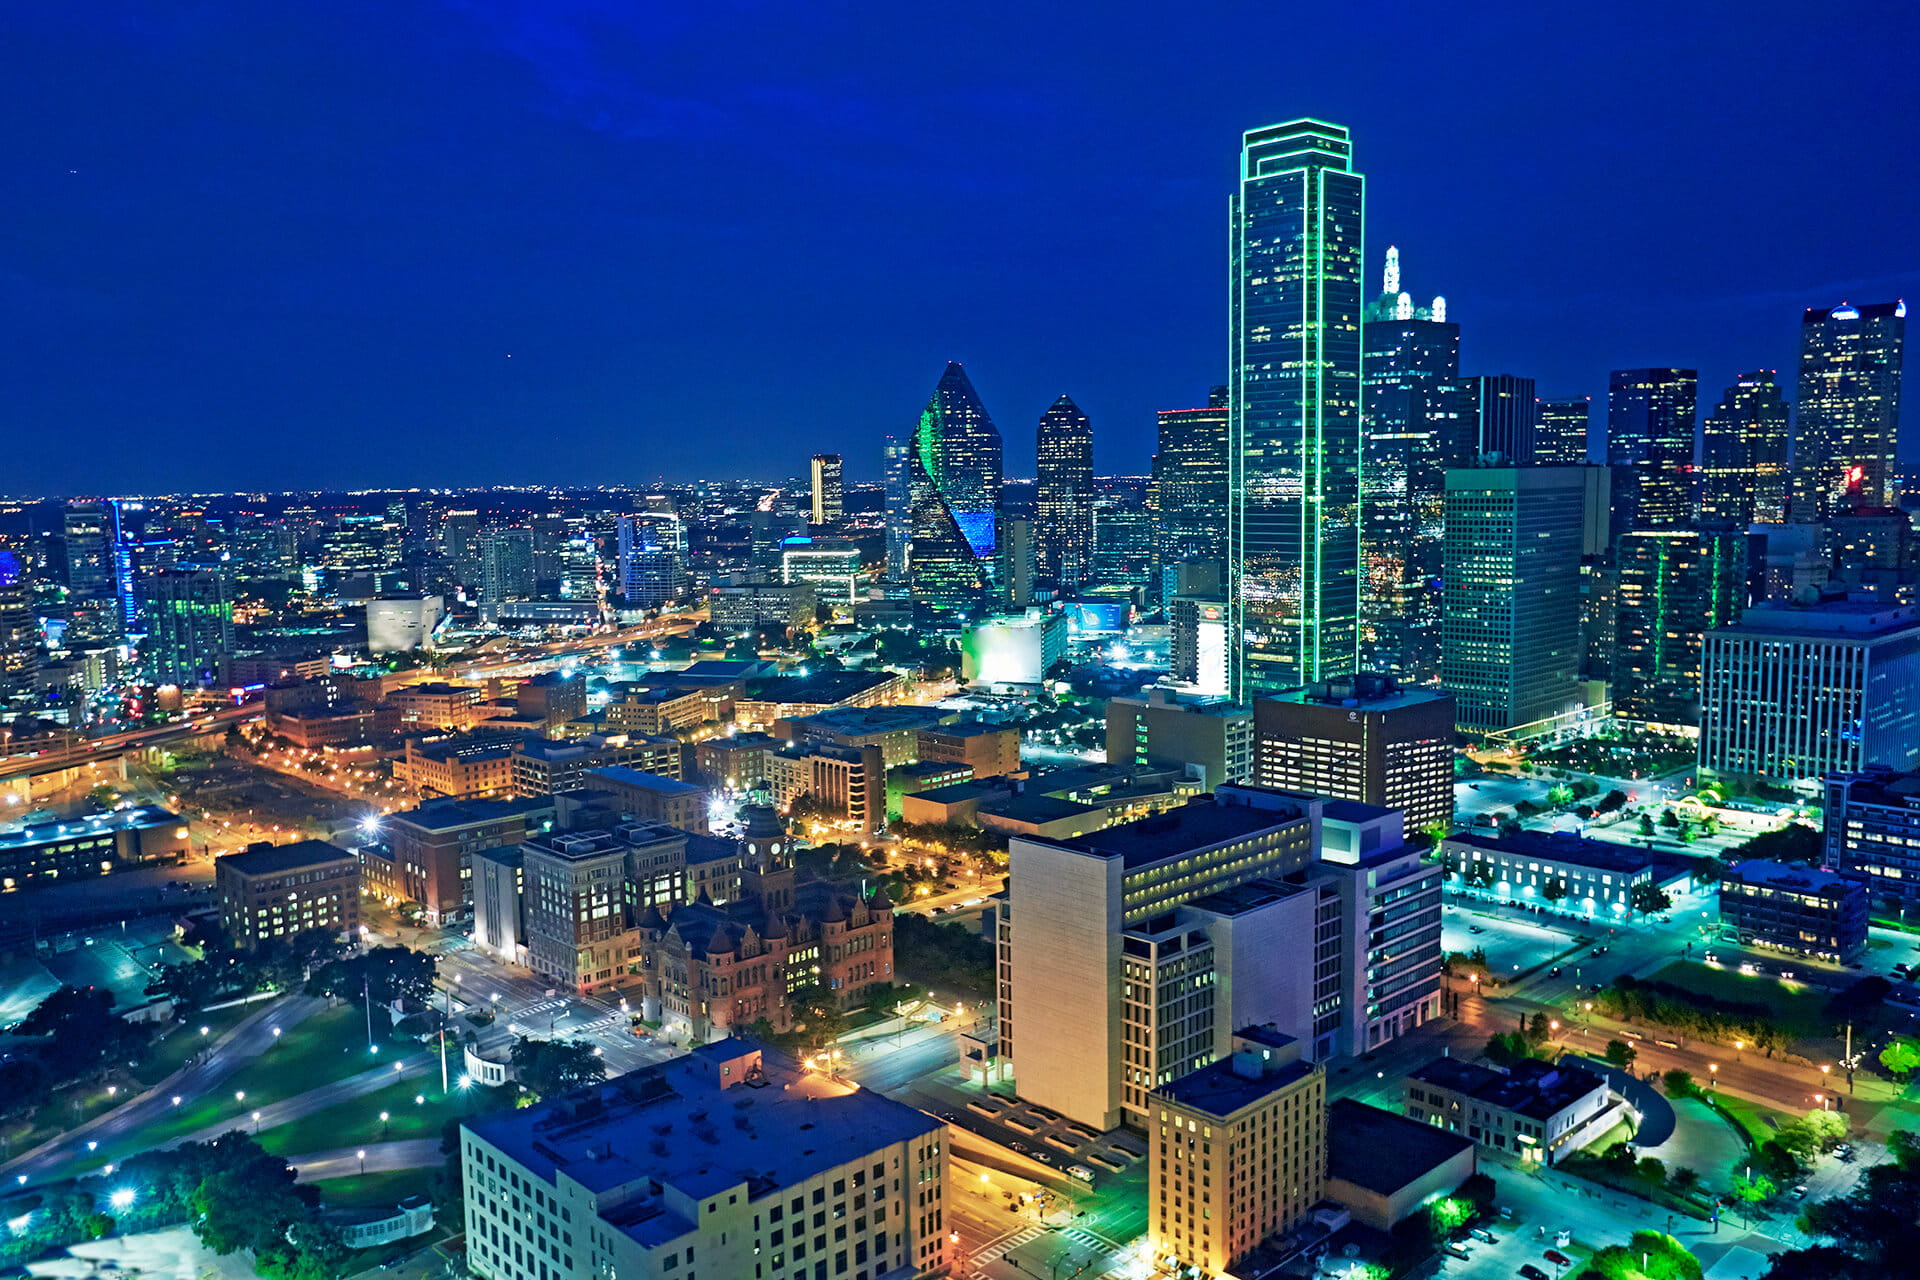 Cityscape of Downtown Dallas at night